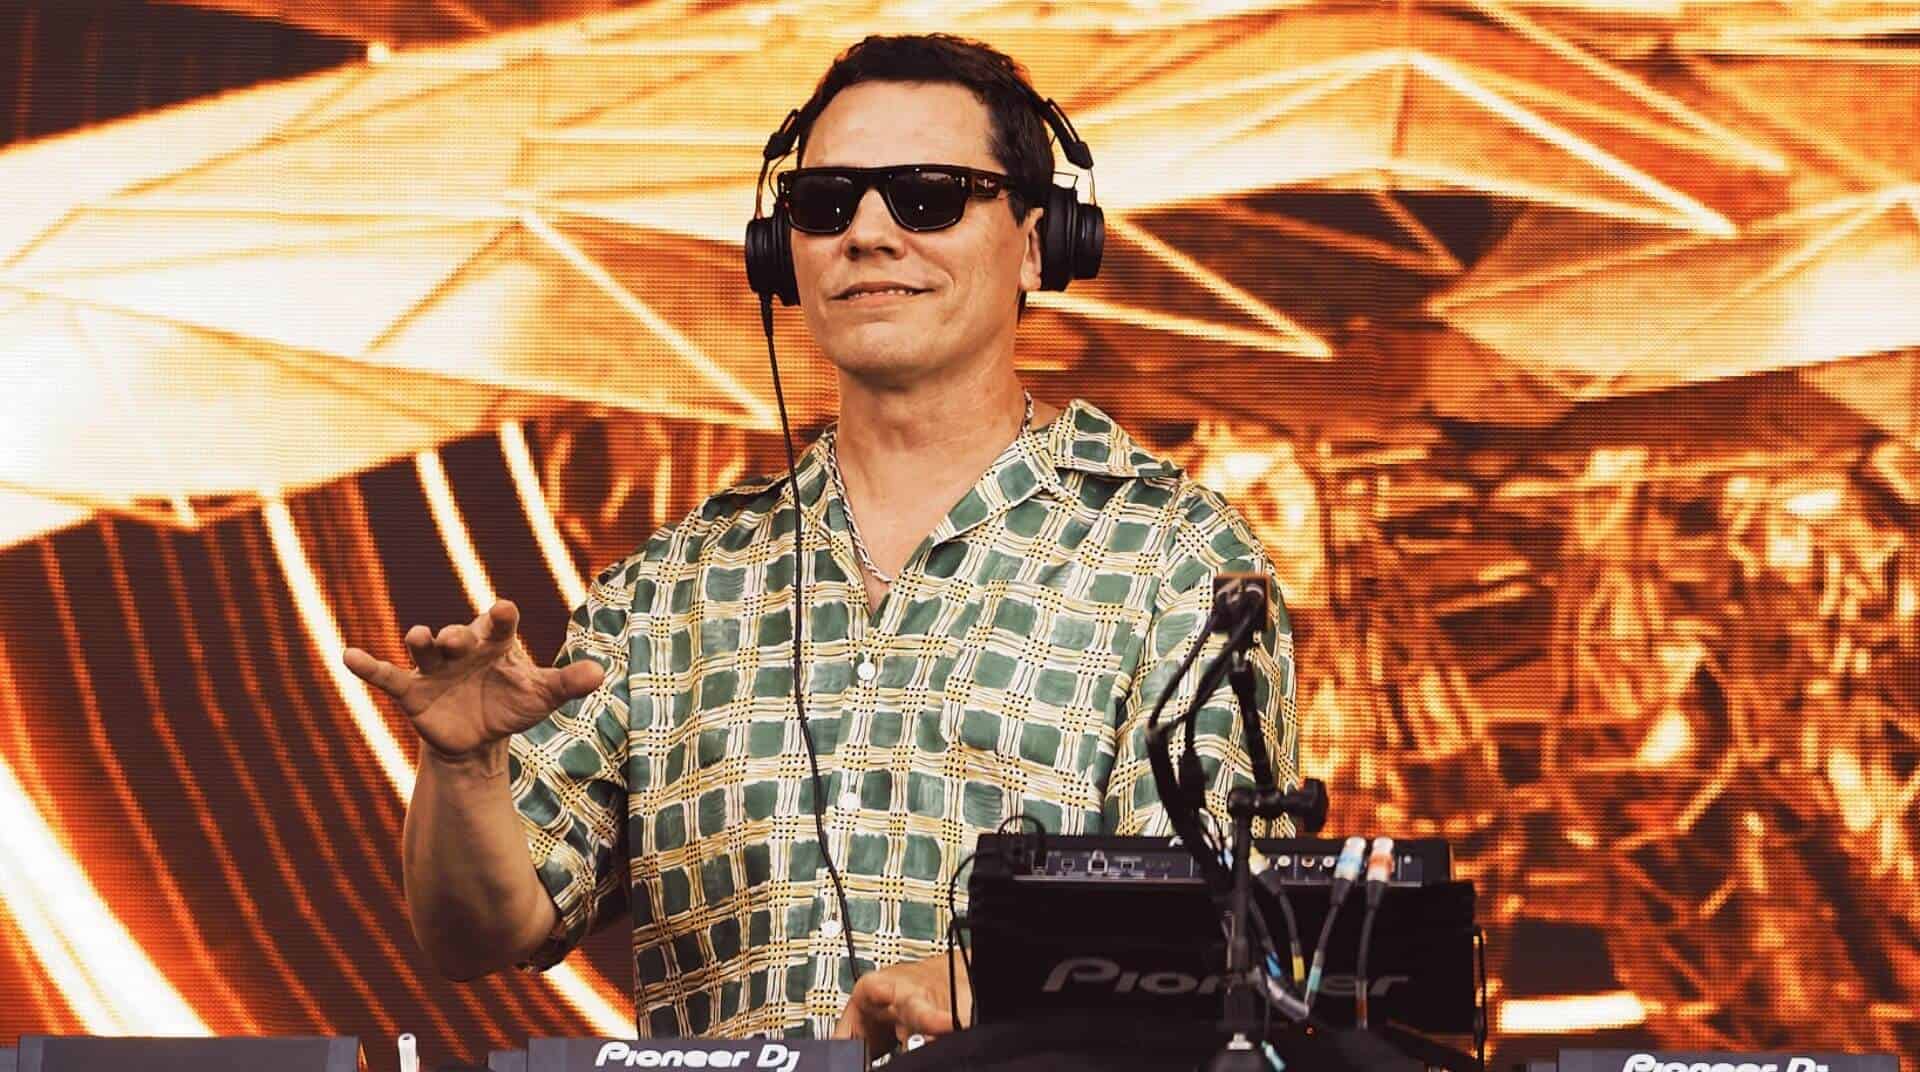 Tiësto set to perform at the first professional concert venue in Cyprus